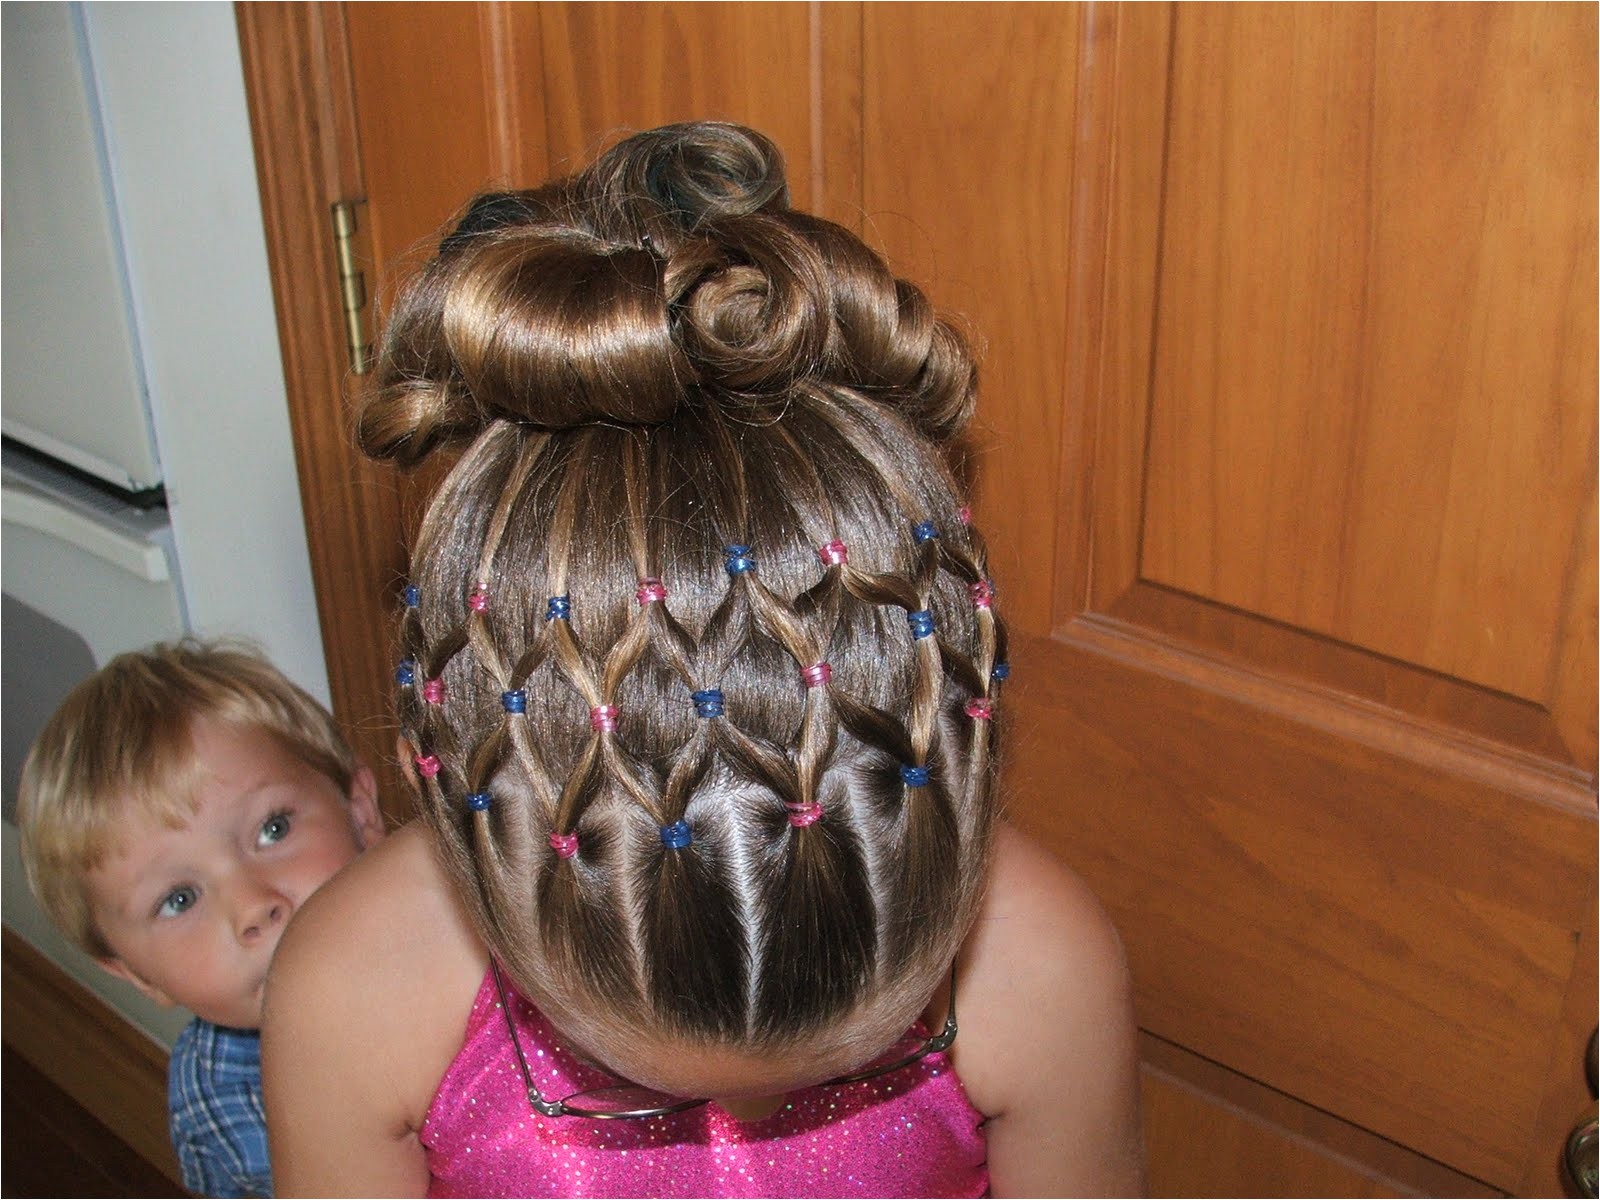 ideas for cute hairstyles for 13 year olds